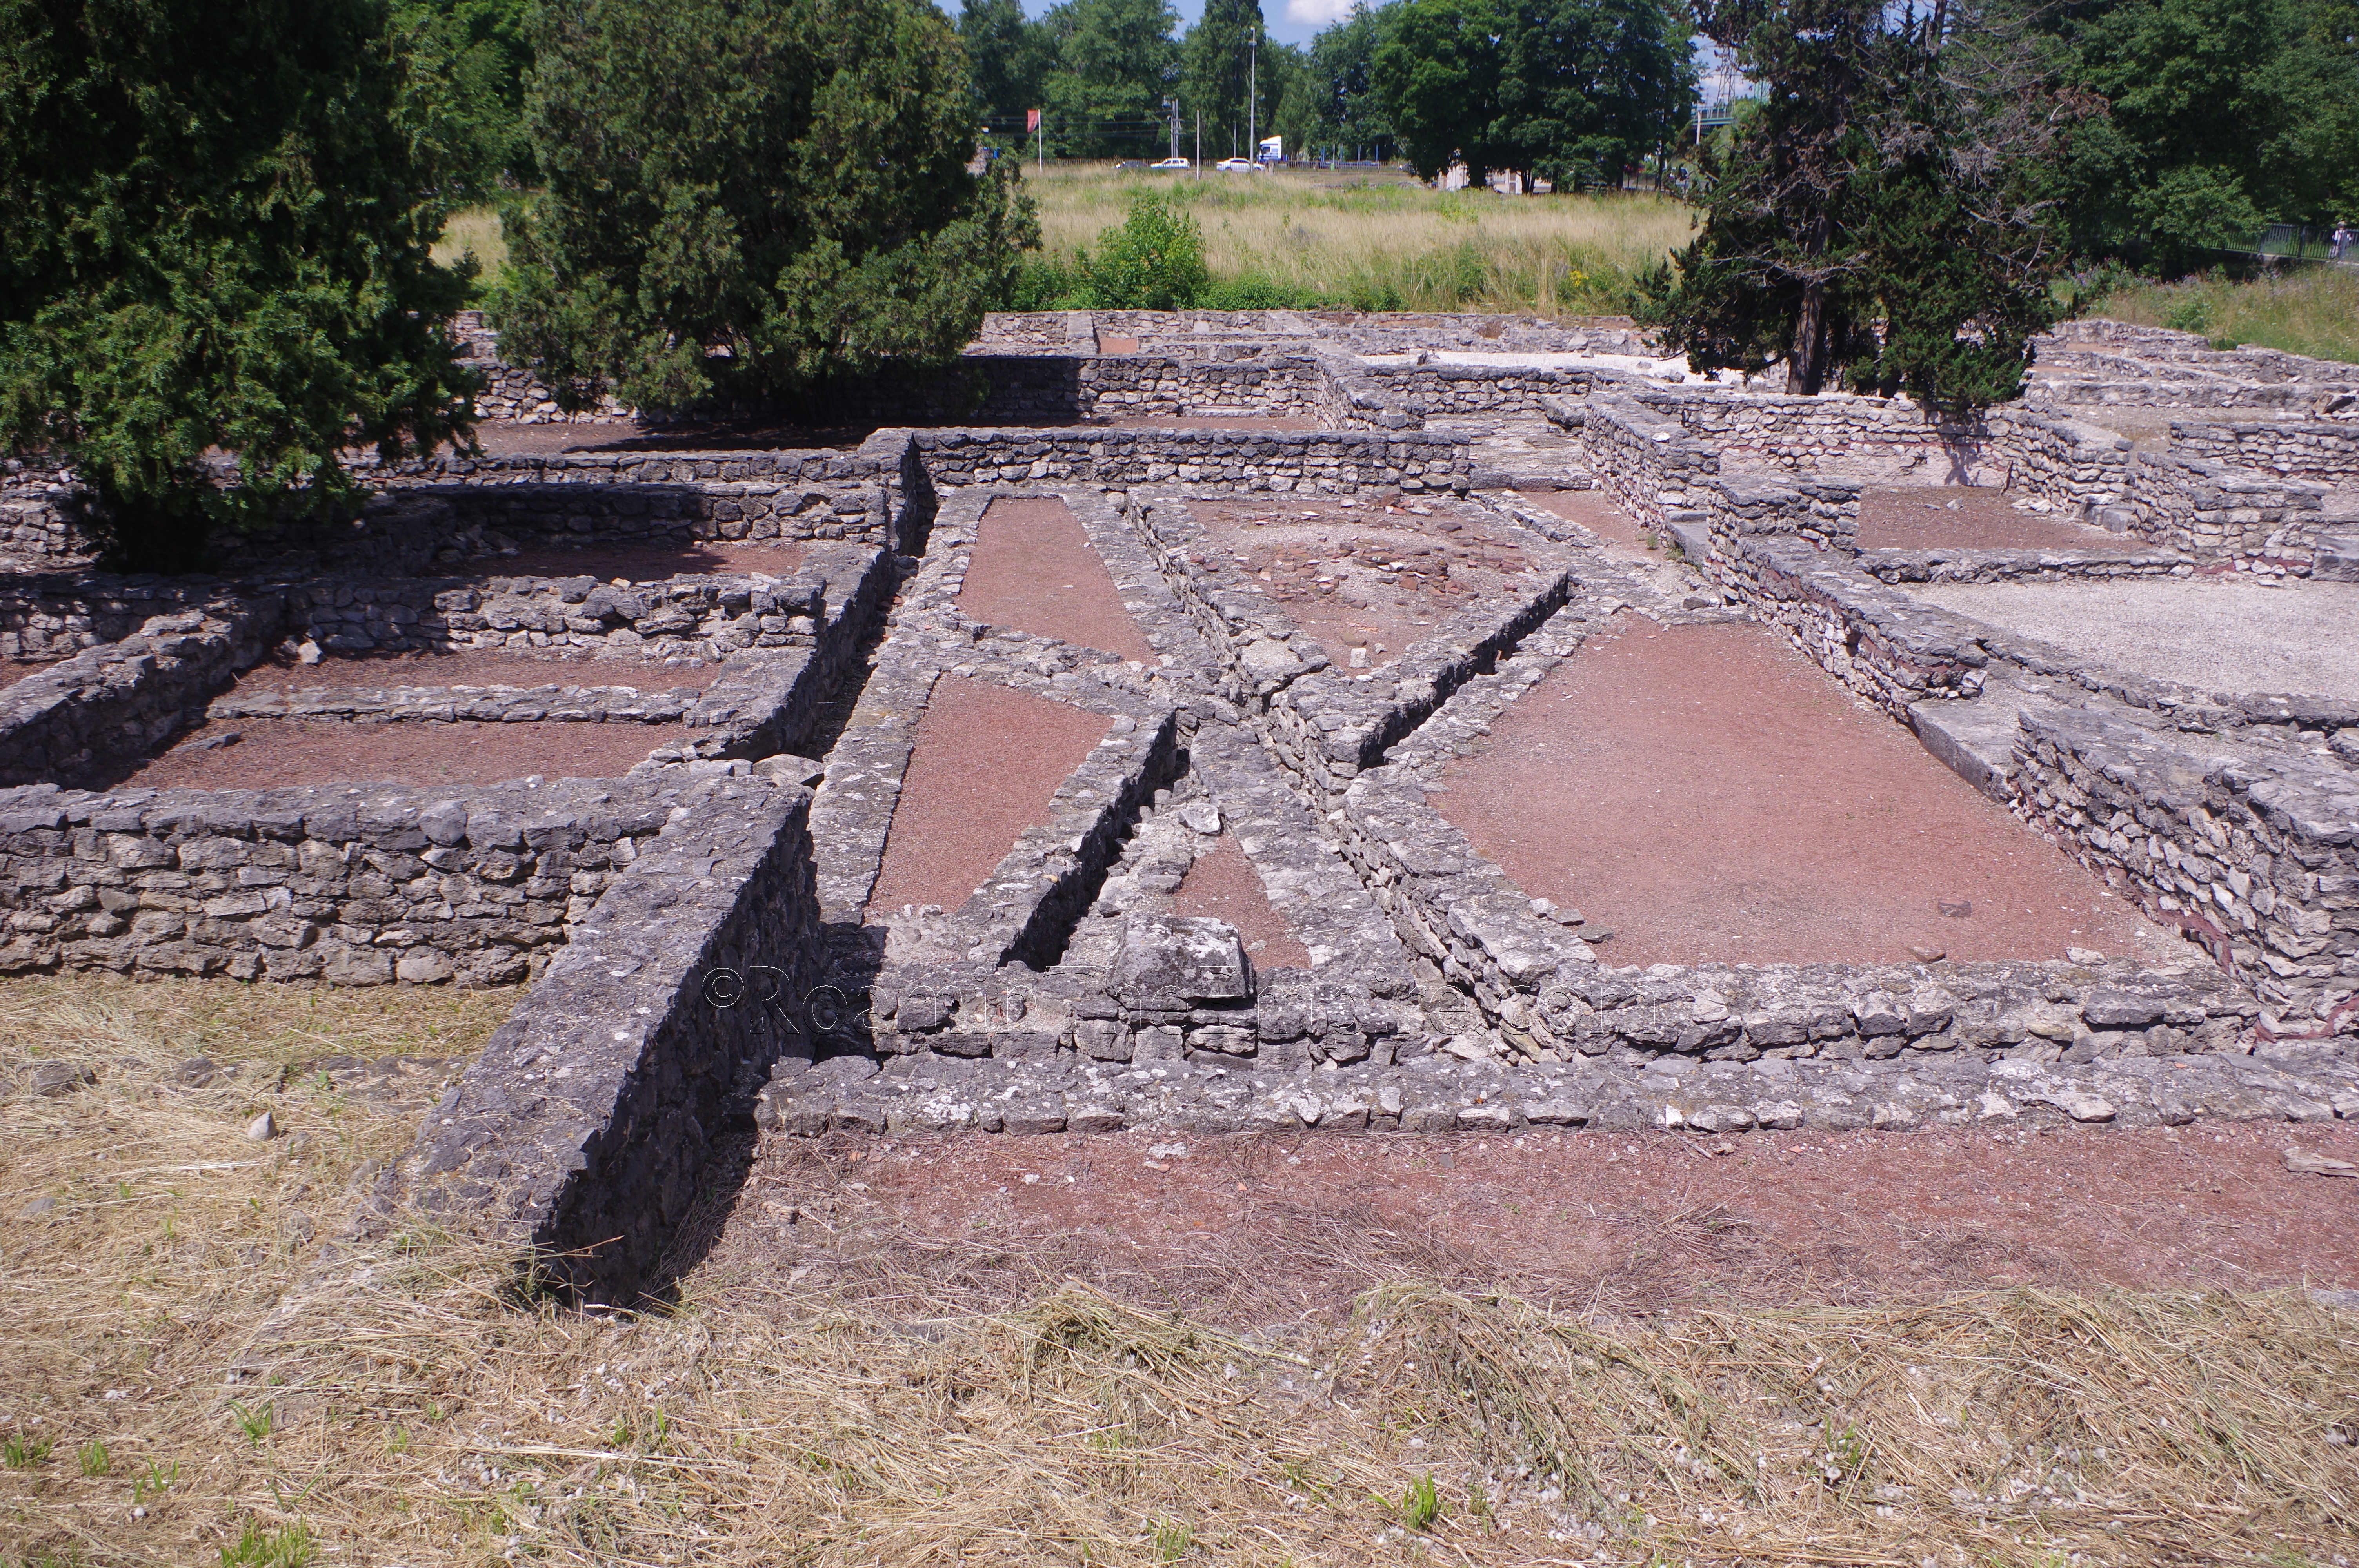 Apodyterium of the northeastern bathing complex. Frigidarium and latrines visible to the right.